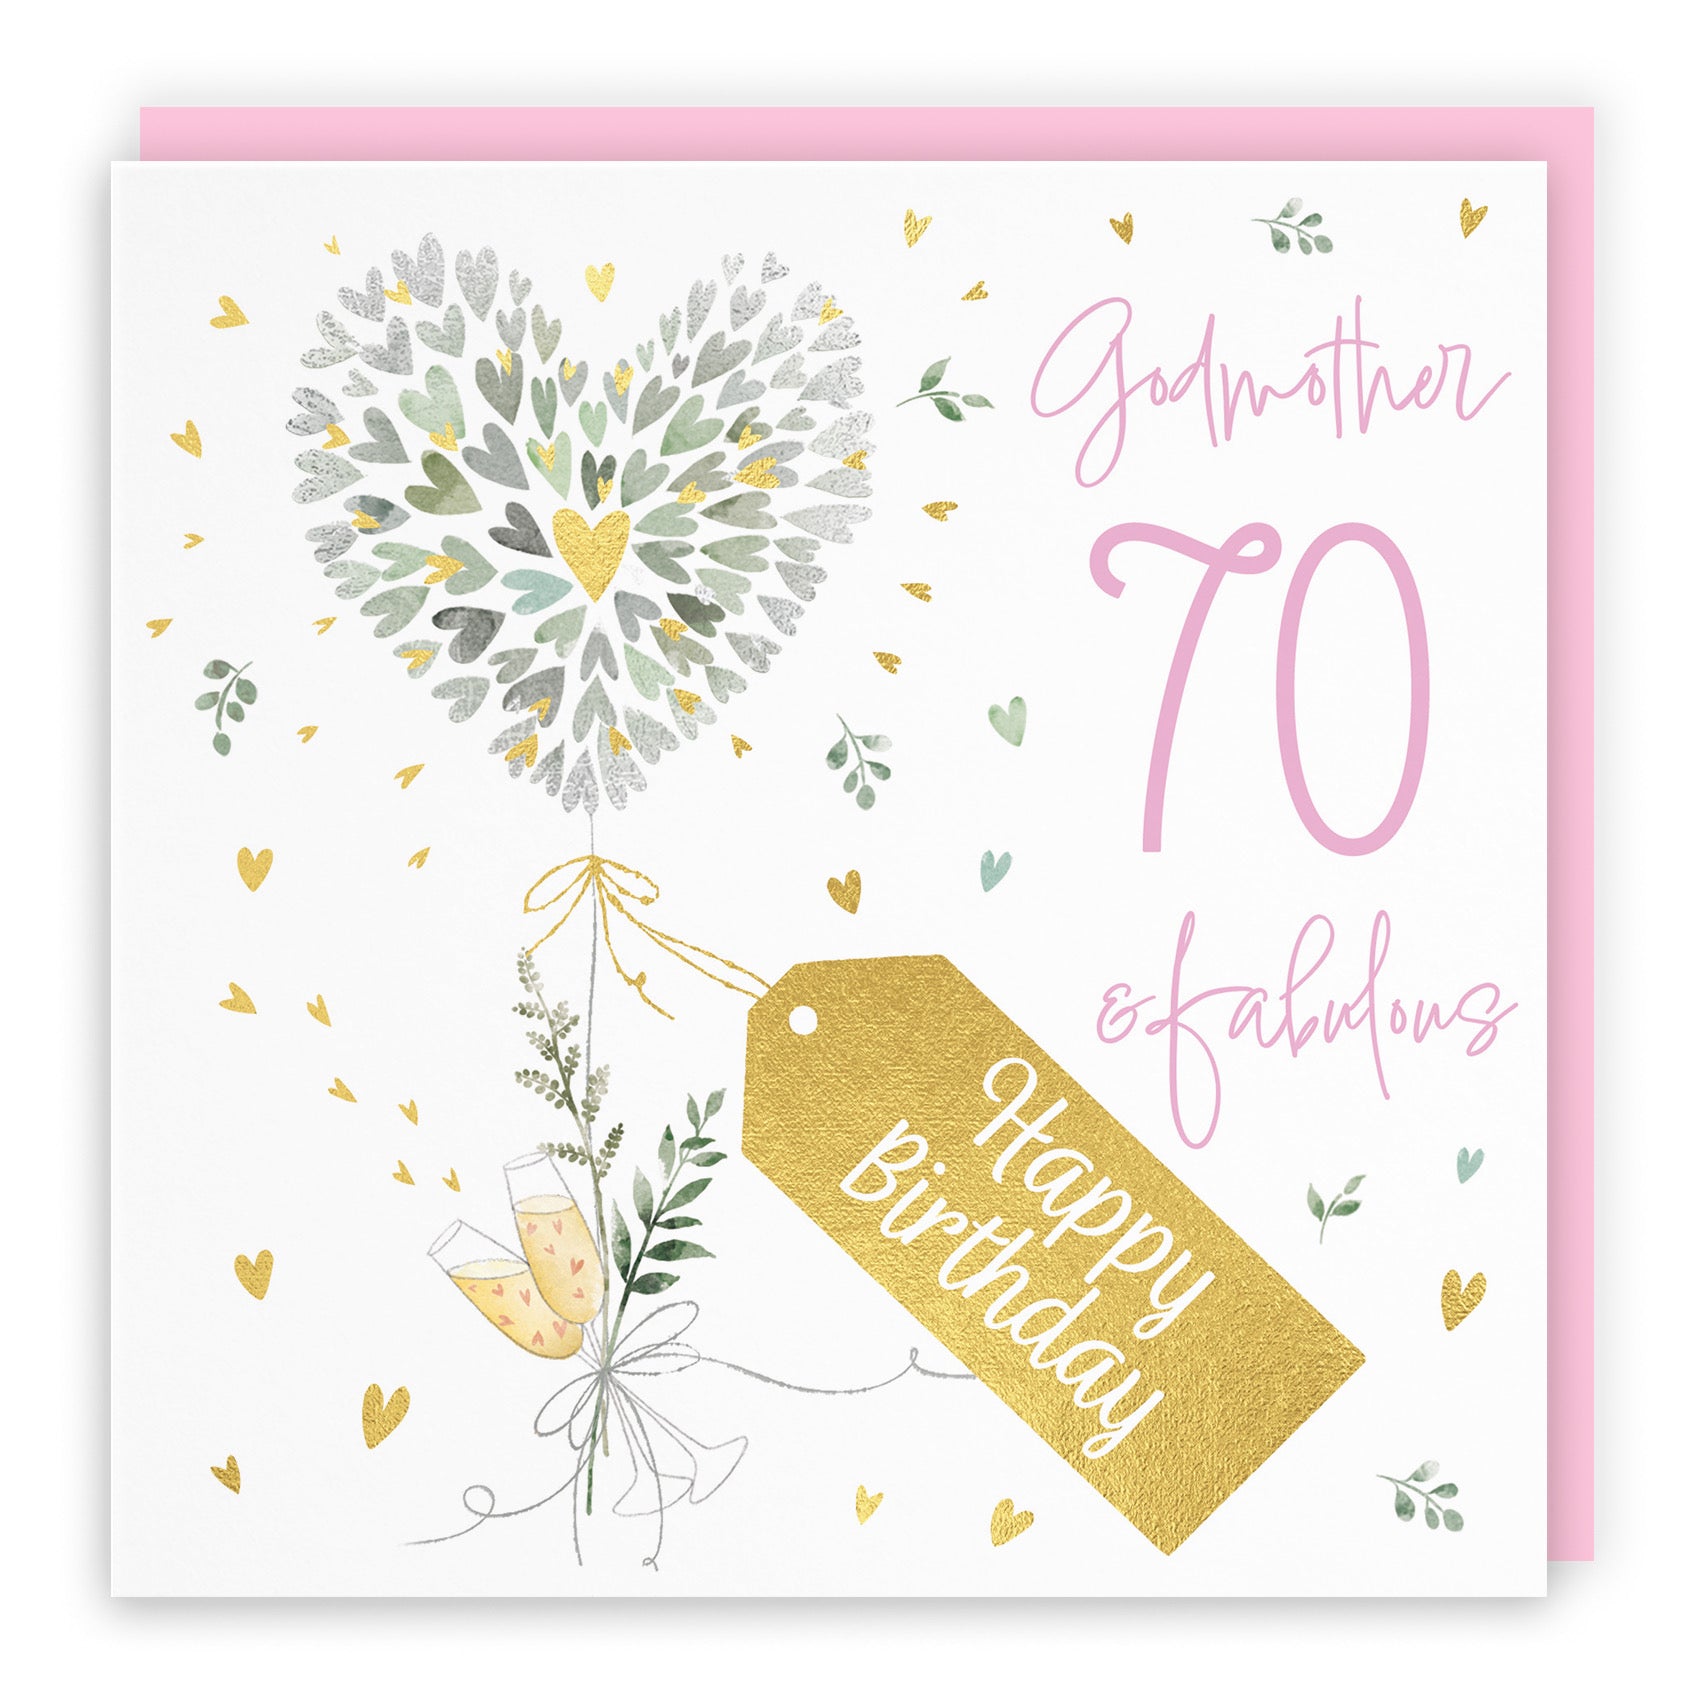 70th Godmother Contemporary Hearts Birthday Card Gold Foil Milo's Gallery - Default Title (B0CY9X6D3S)